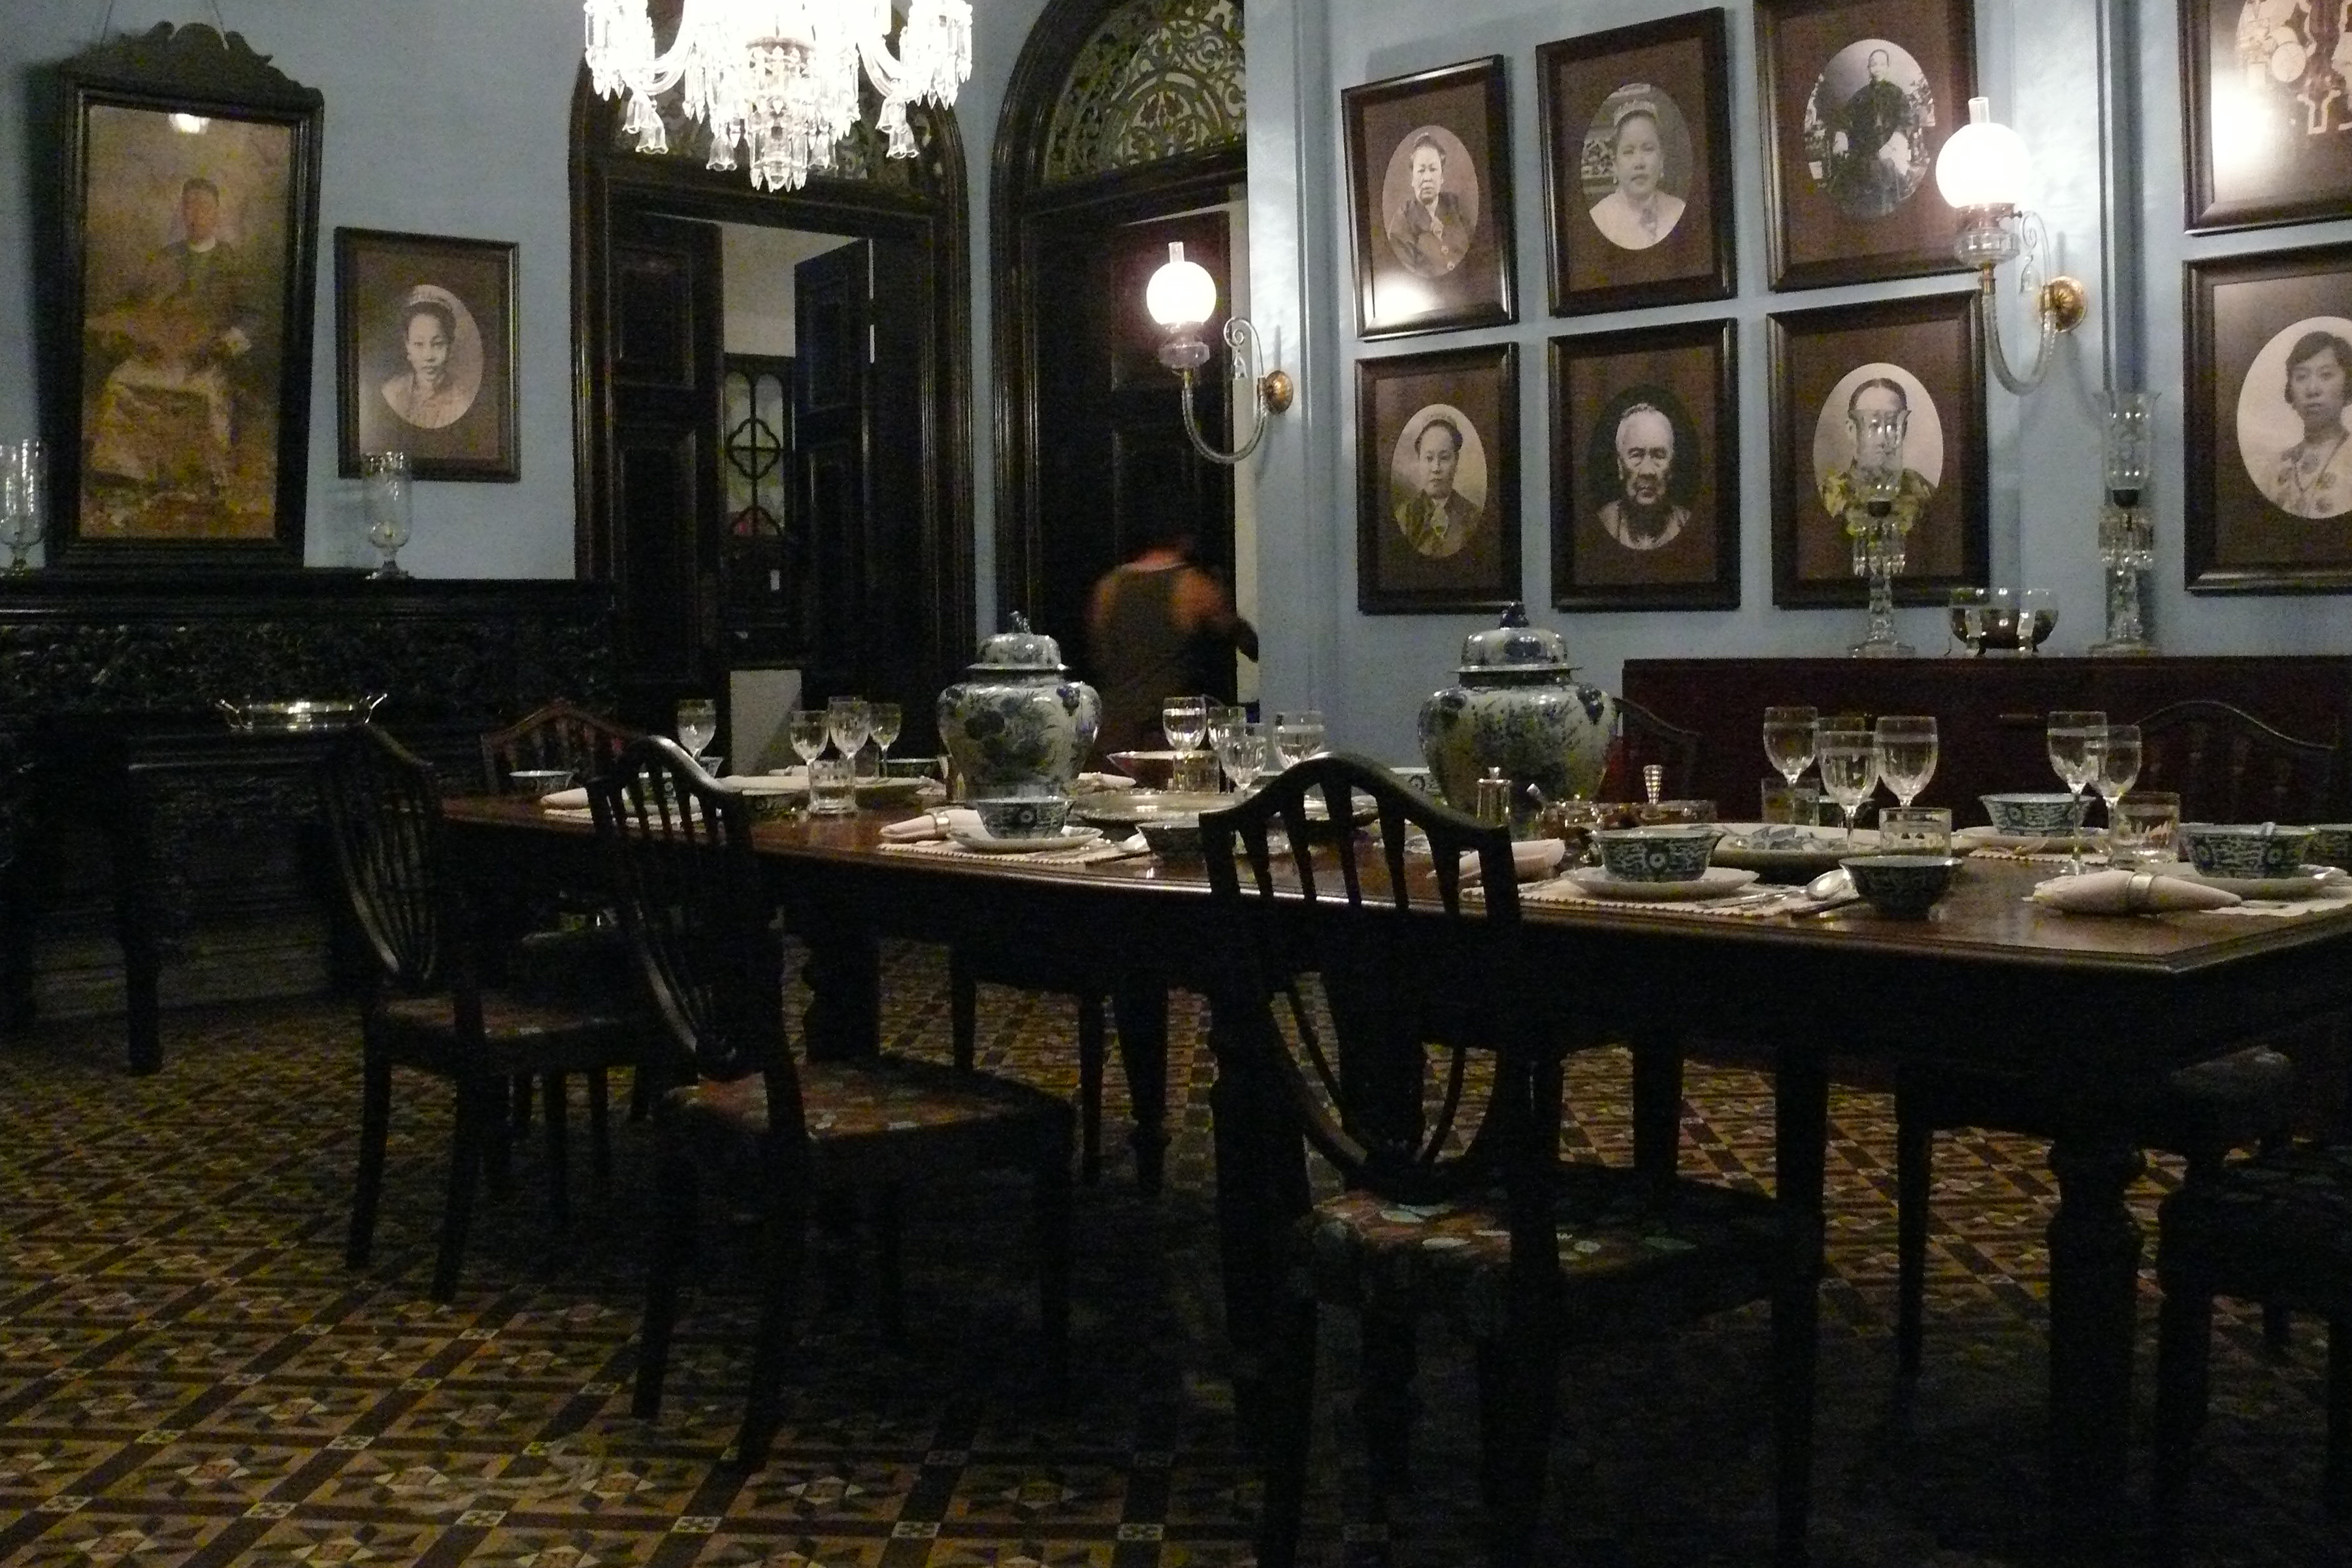 Peranakan Dining Room. 'The Blue Mansion' Directed and Produced by Glen Goei